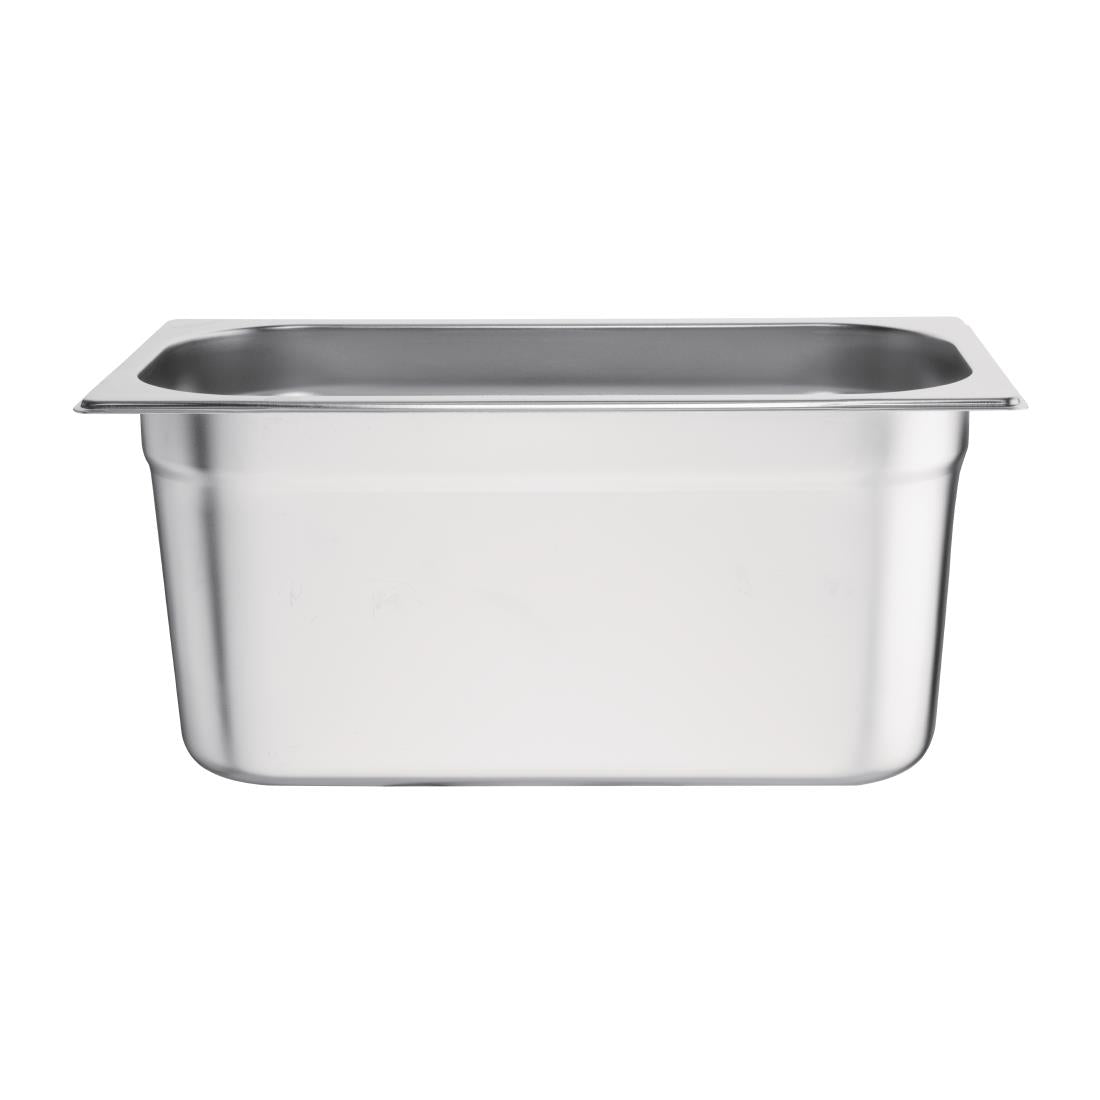 Vogue Stainless Steel 1/3 Gastronorm Pan 150mm